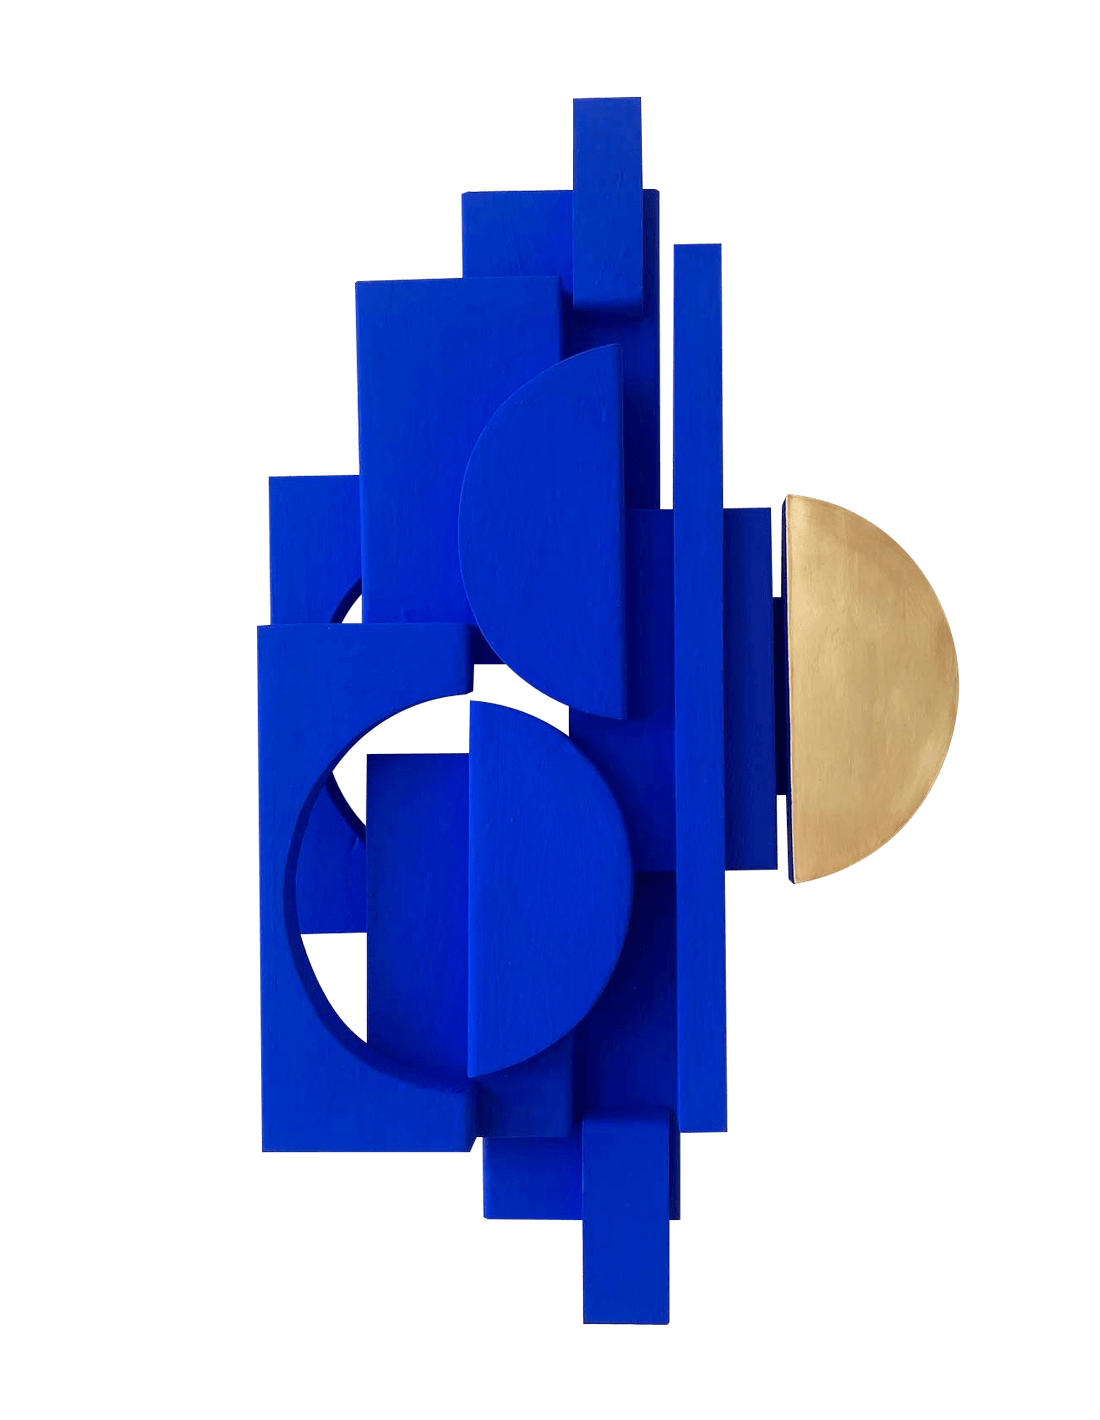 Blue object with brass